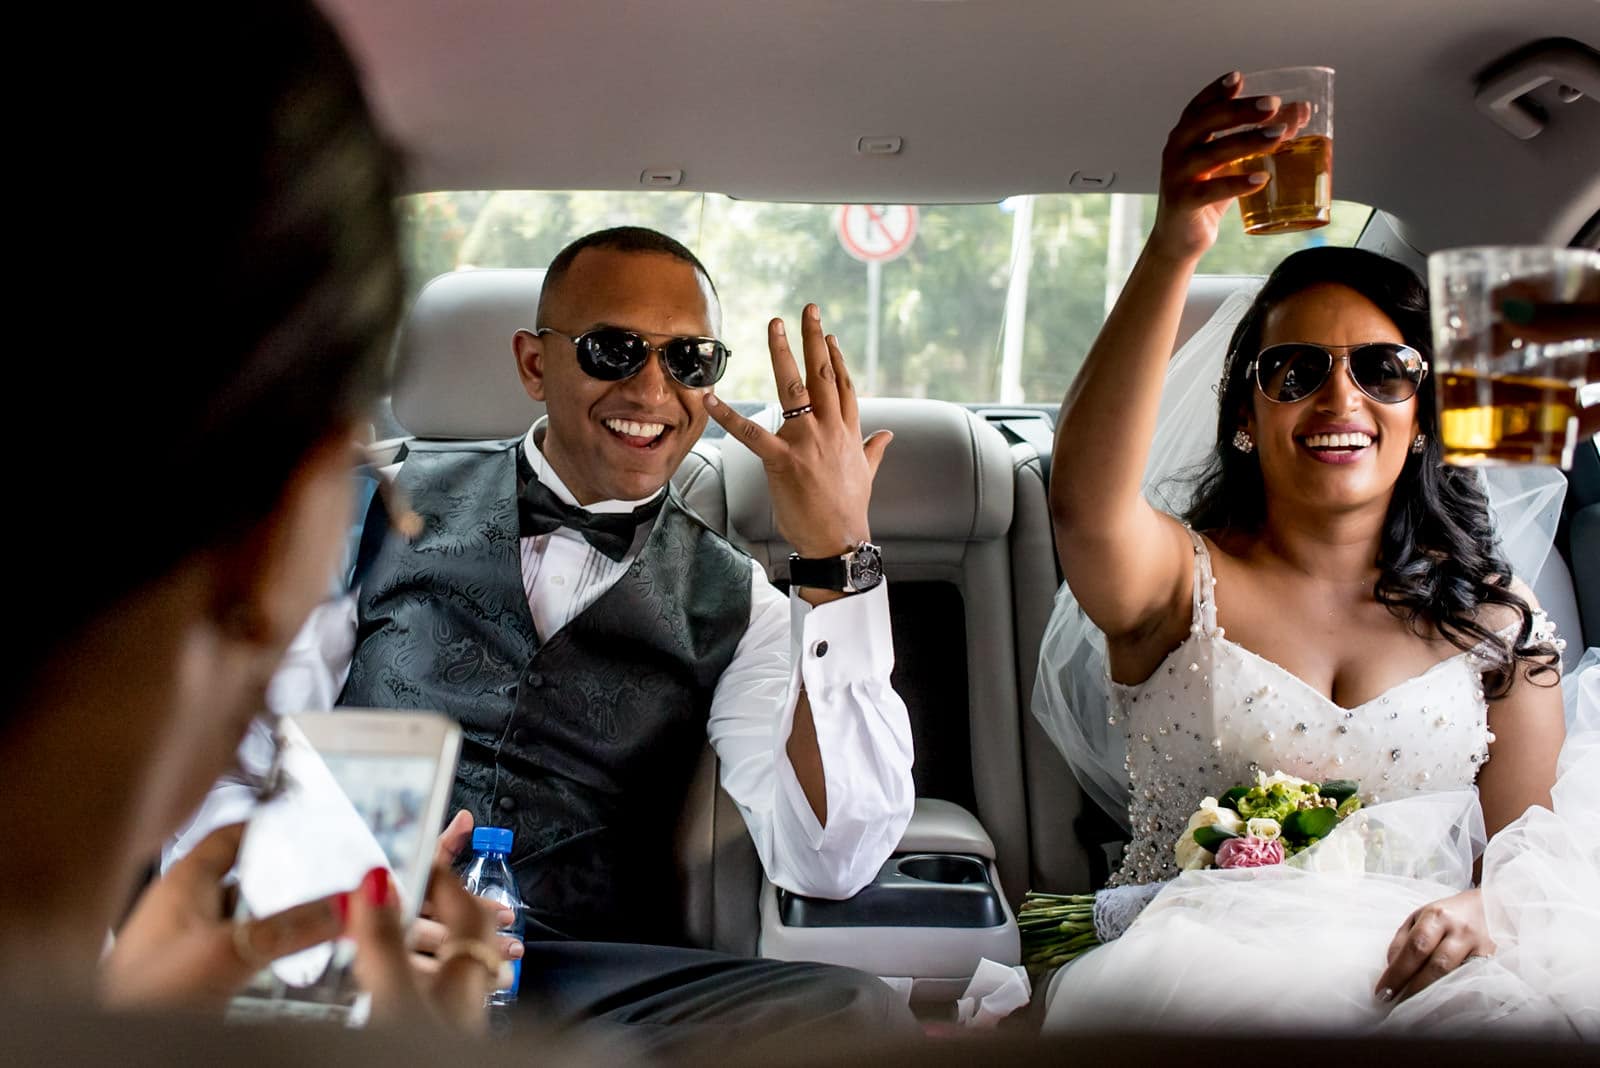 Ethiopian bride and groom drinking Johnny Walker Black whisky in a limo in Addis